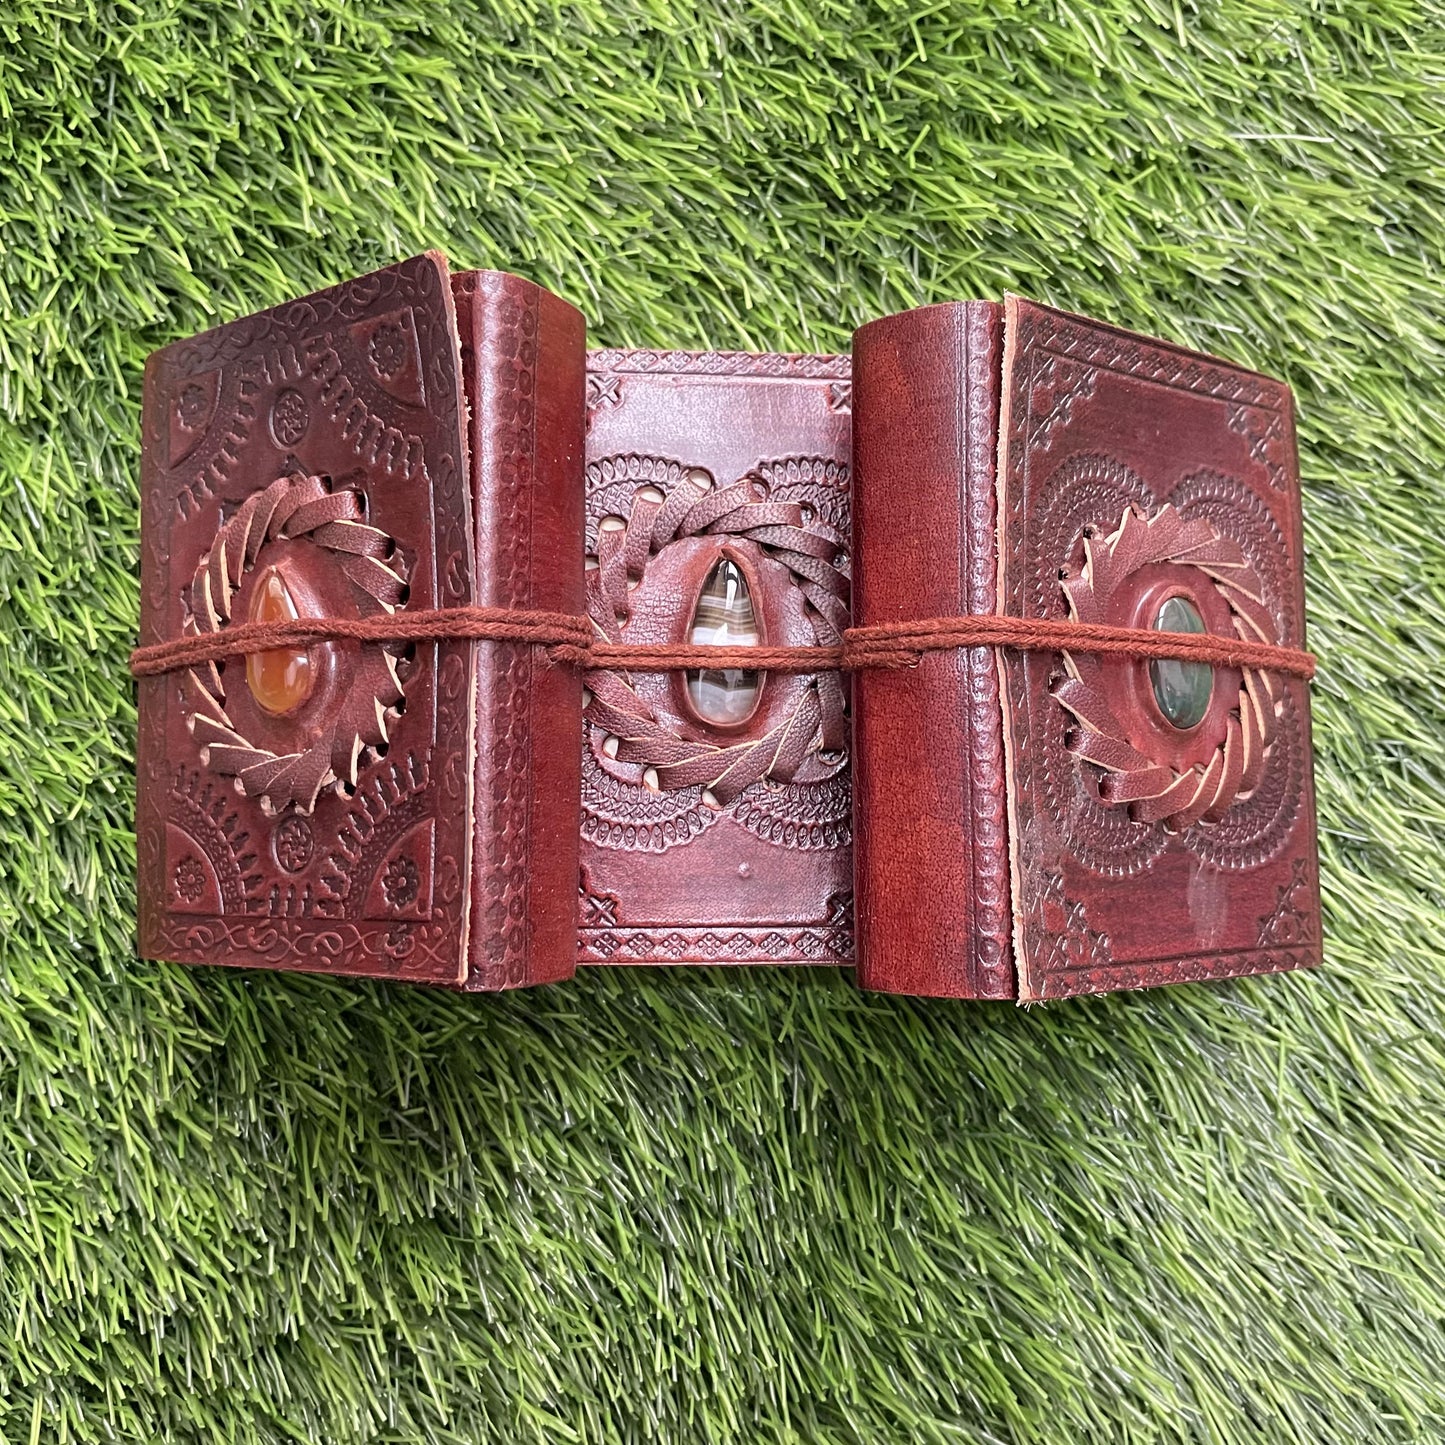 Embellished Leather Diary in a Compact 4x3 Inch Size" With Natural Gemstone